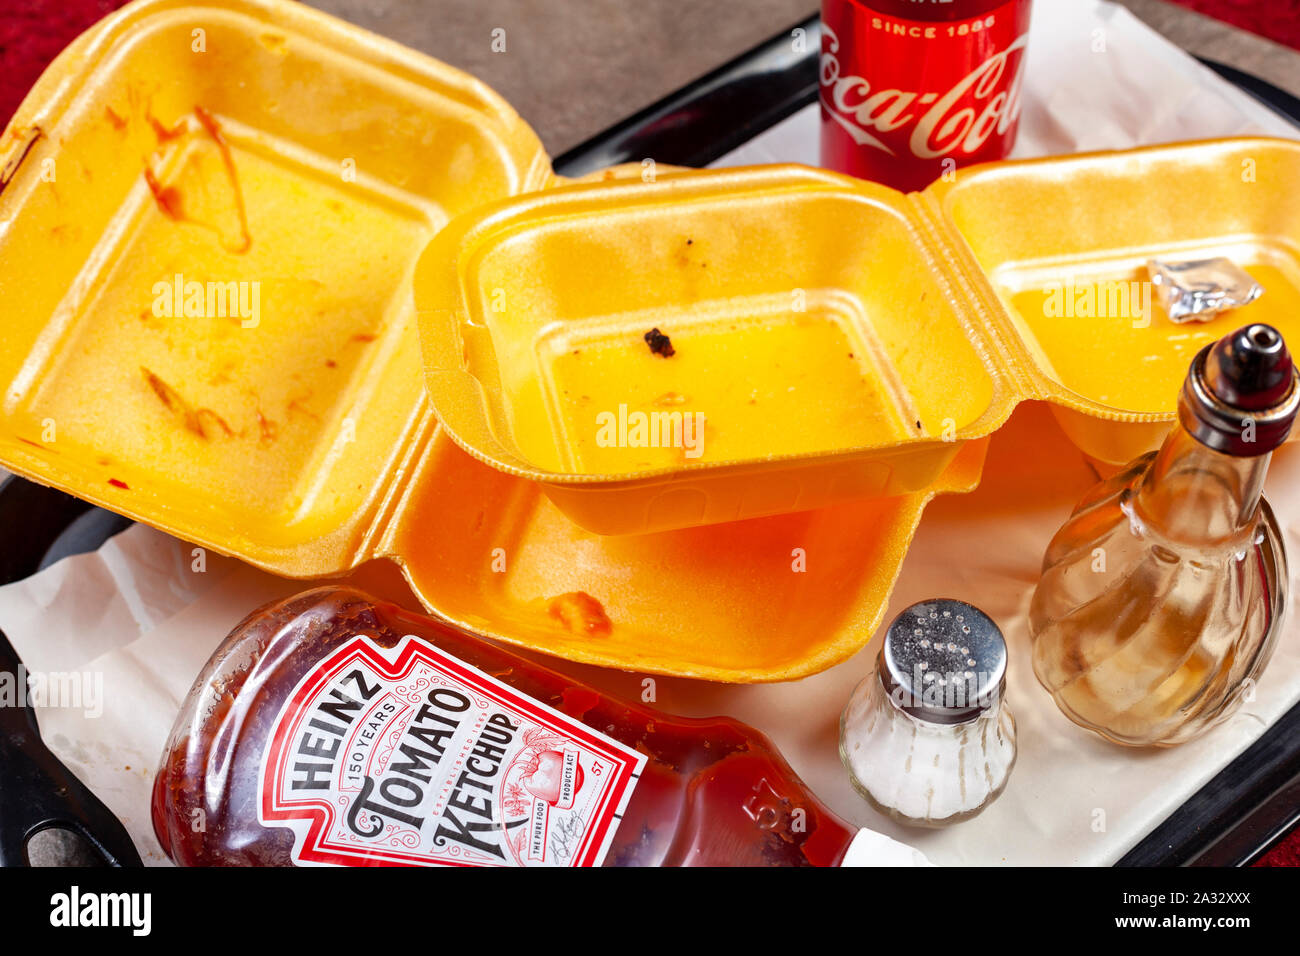 WELWYN GARDEN CITY, UK - OCTOBER 01, 2019: Empty take away cartons on a tray with a drink can and a ketchup bottle Stock Photo